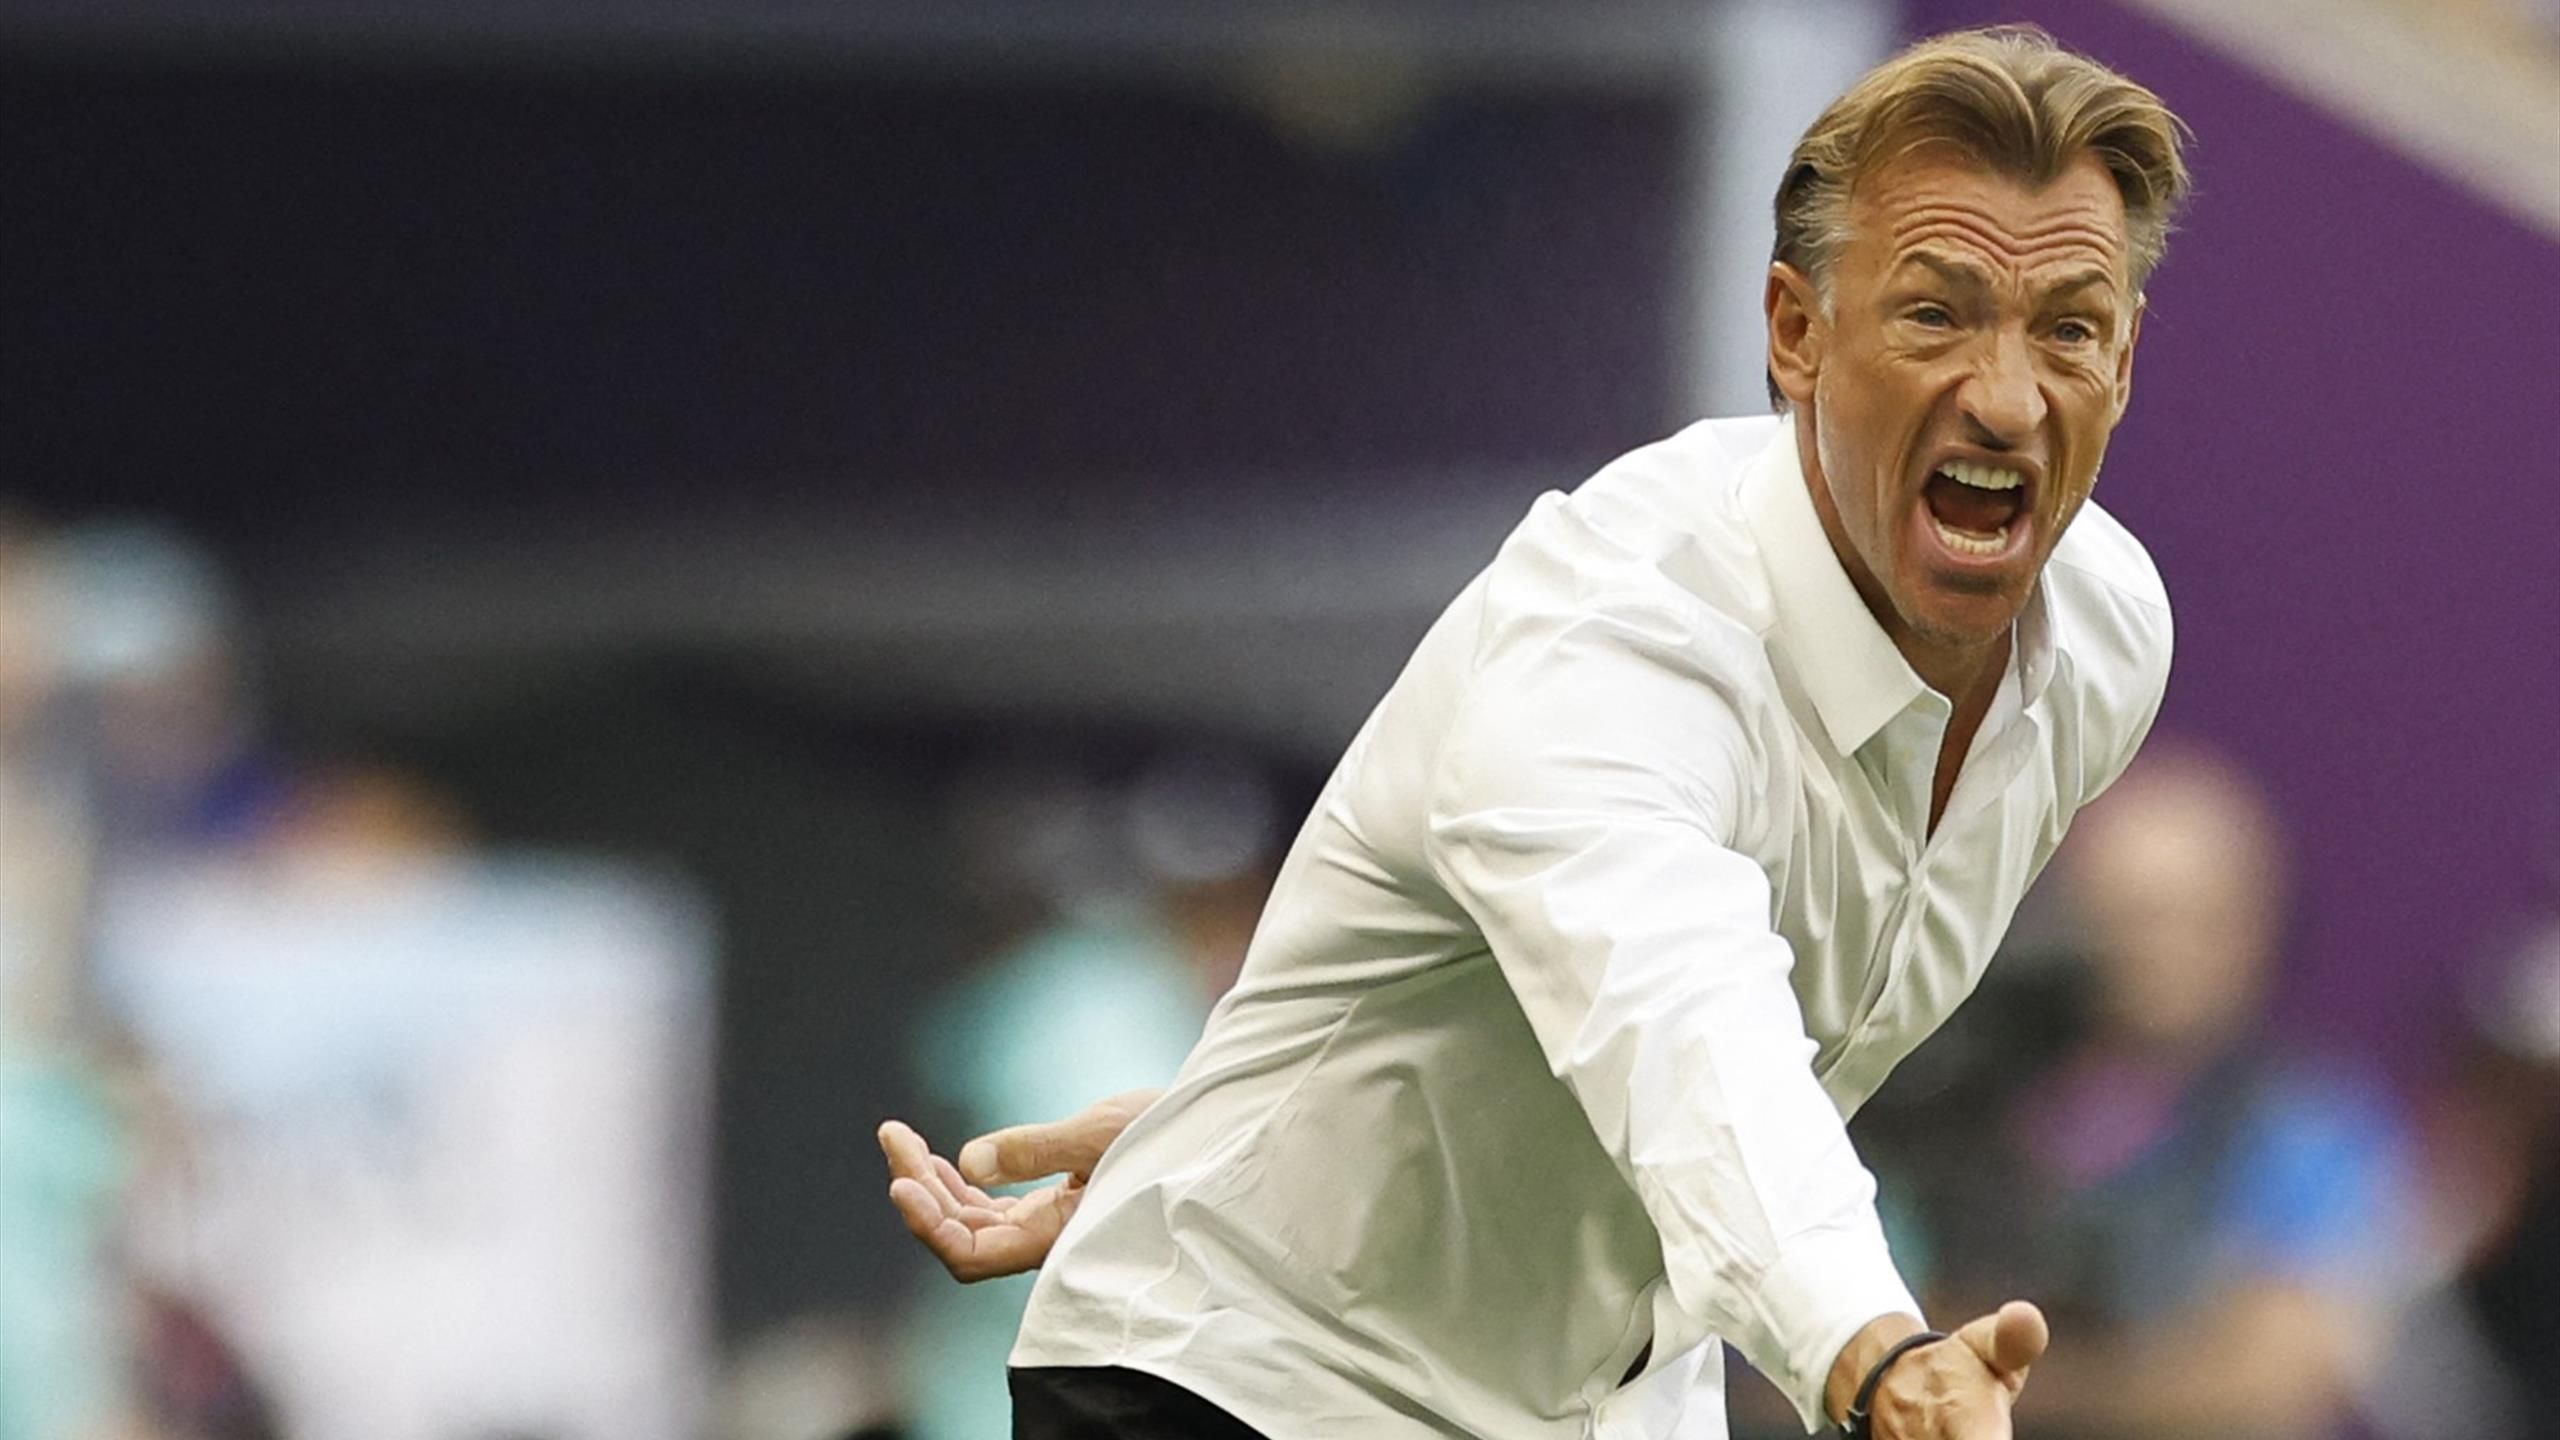 Herve Renard named head coach of French women's national team 03/31/2023